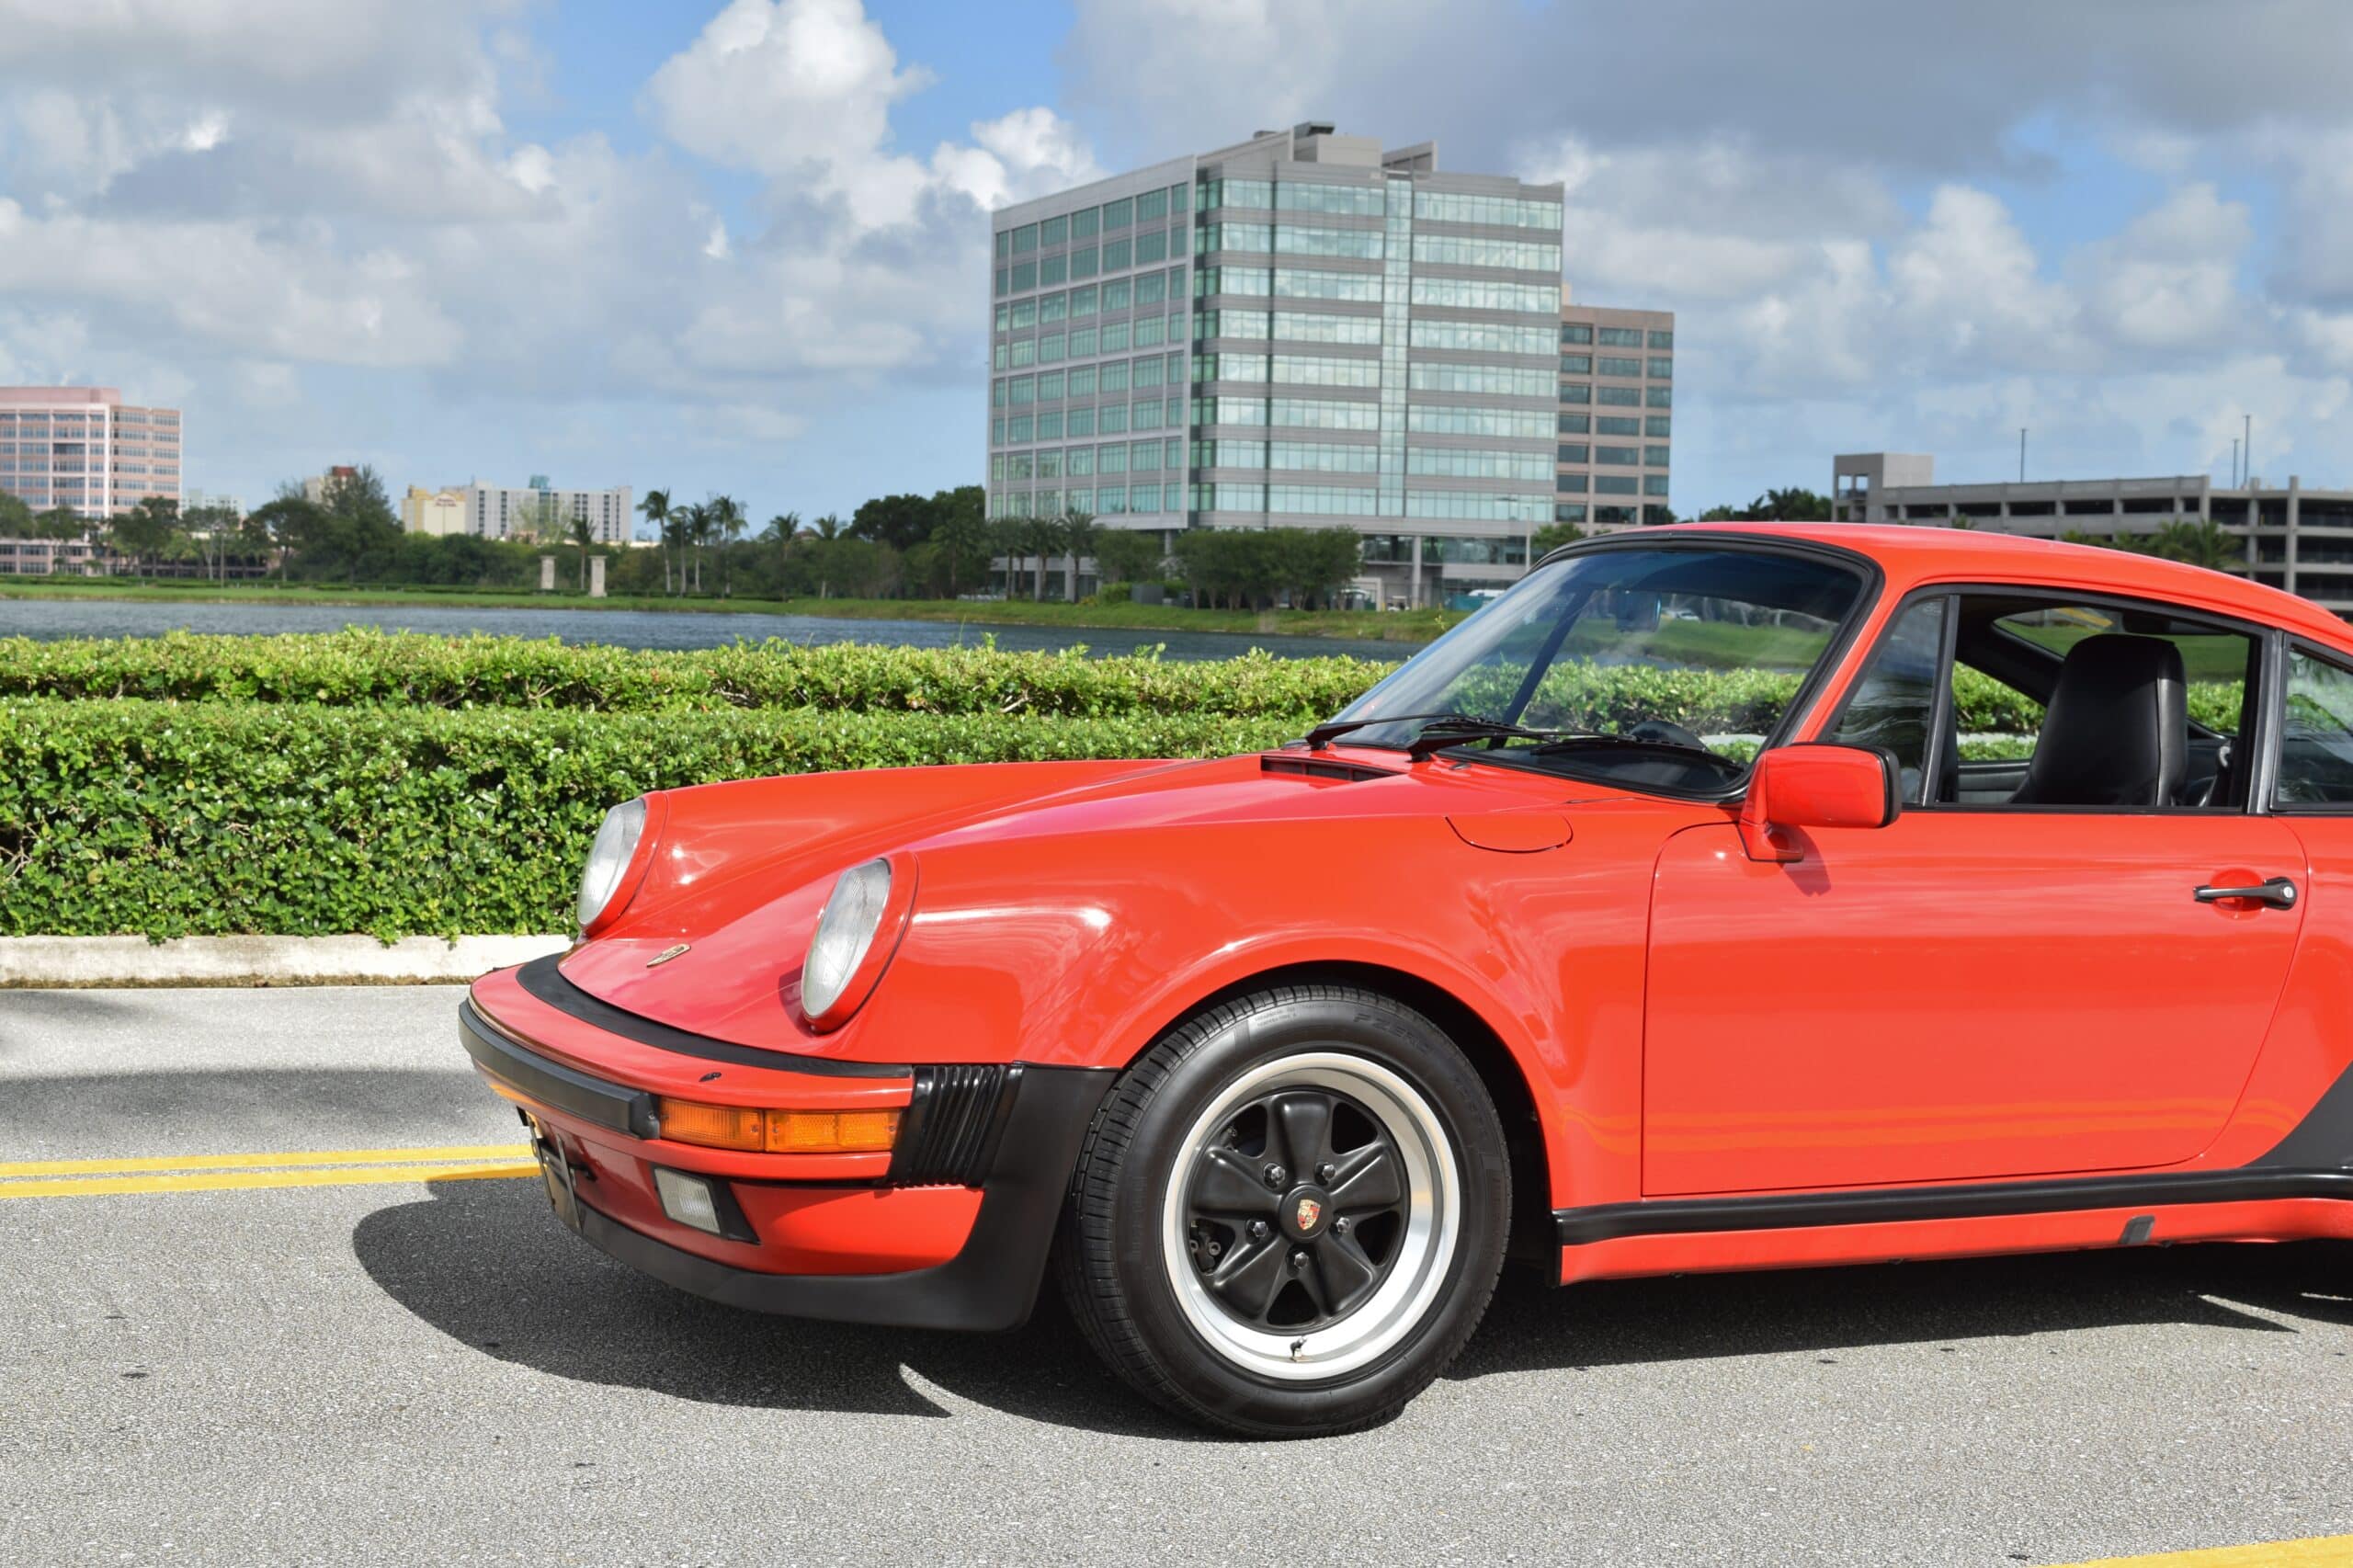 1986 Porsche 911 Turbo 930 Only 51K Miles-Matching Numbers-100% Stock-Engine reseal Porsche Service History